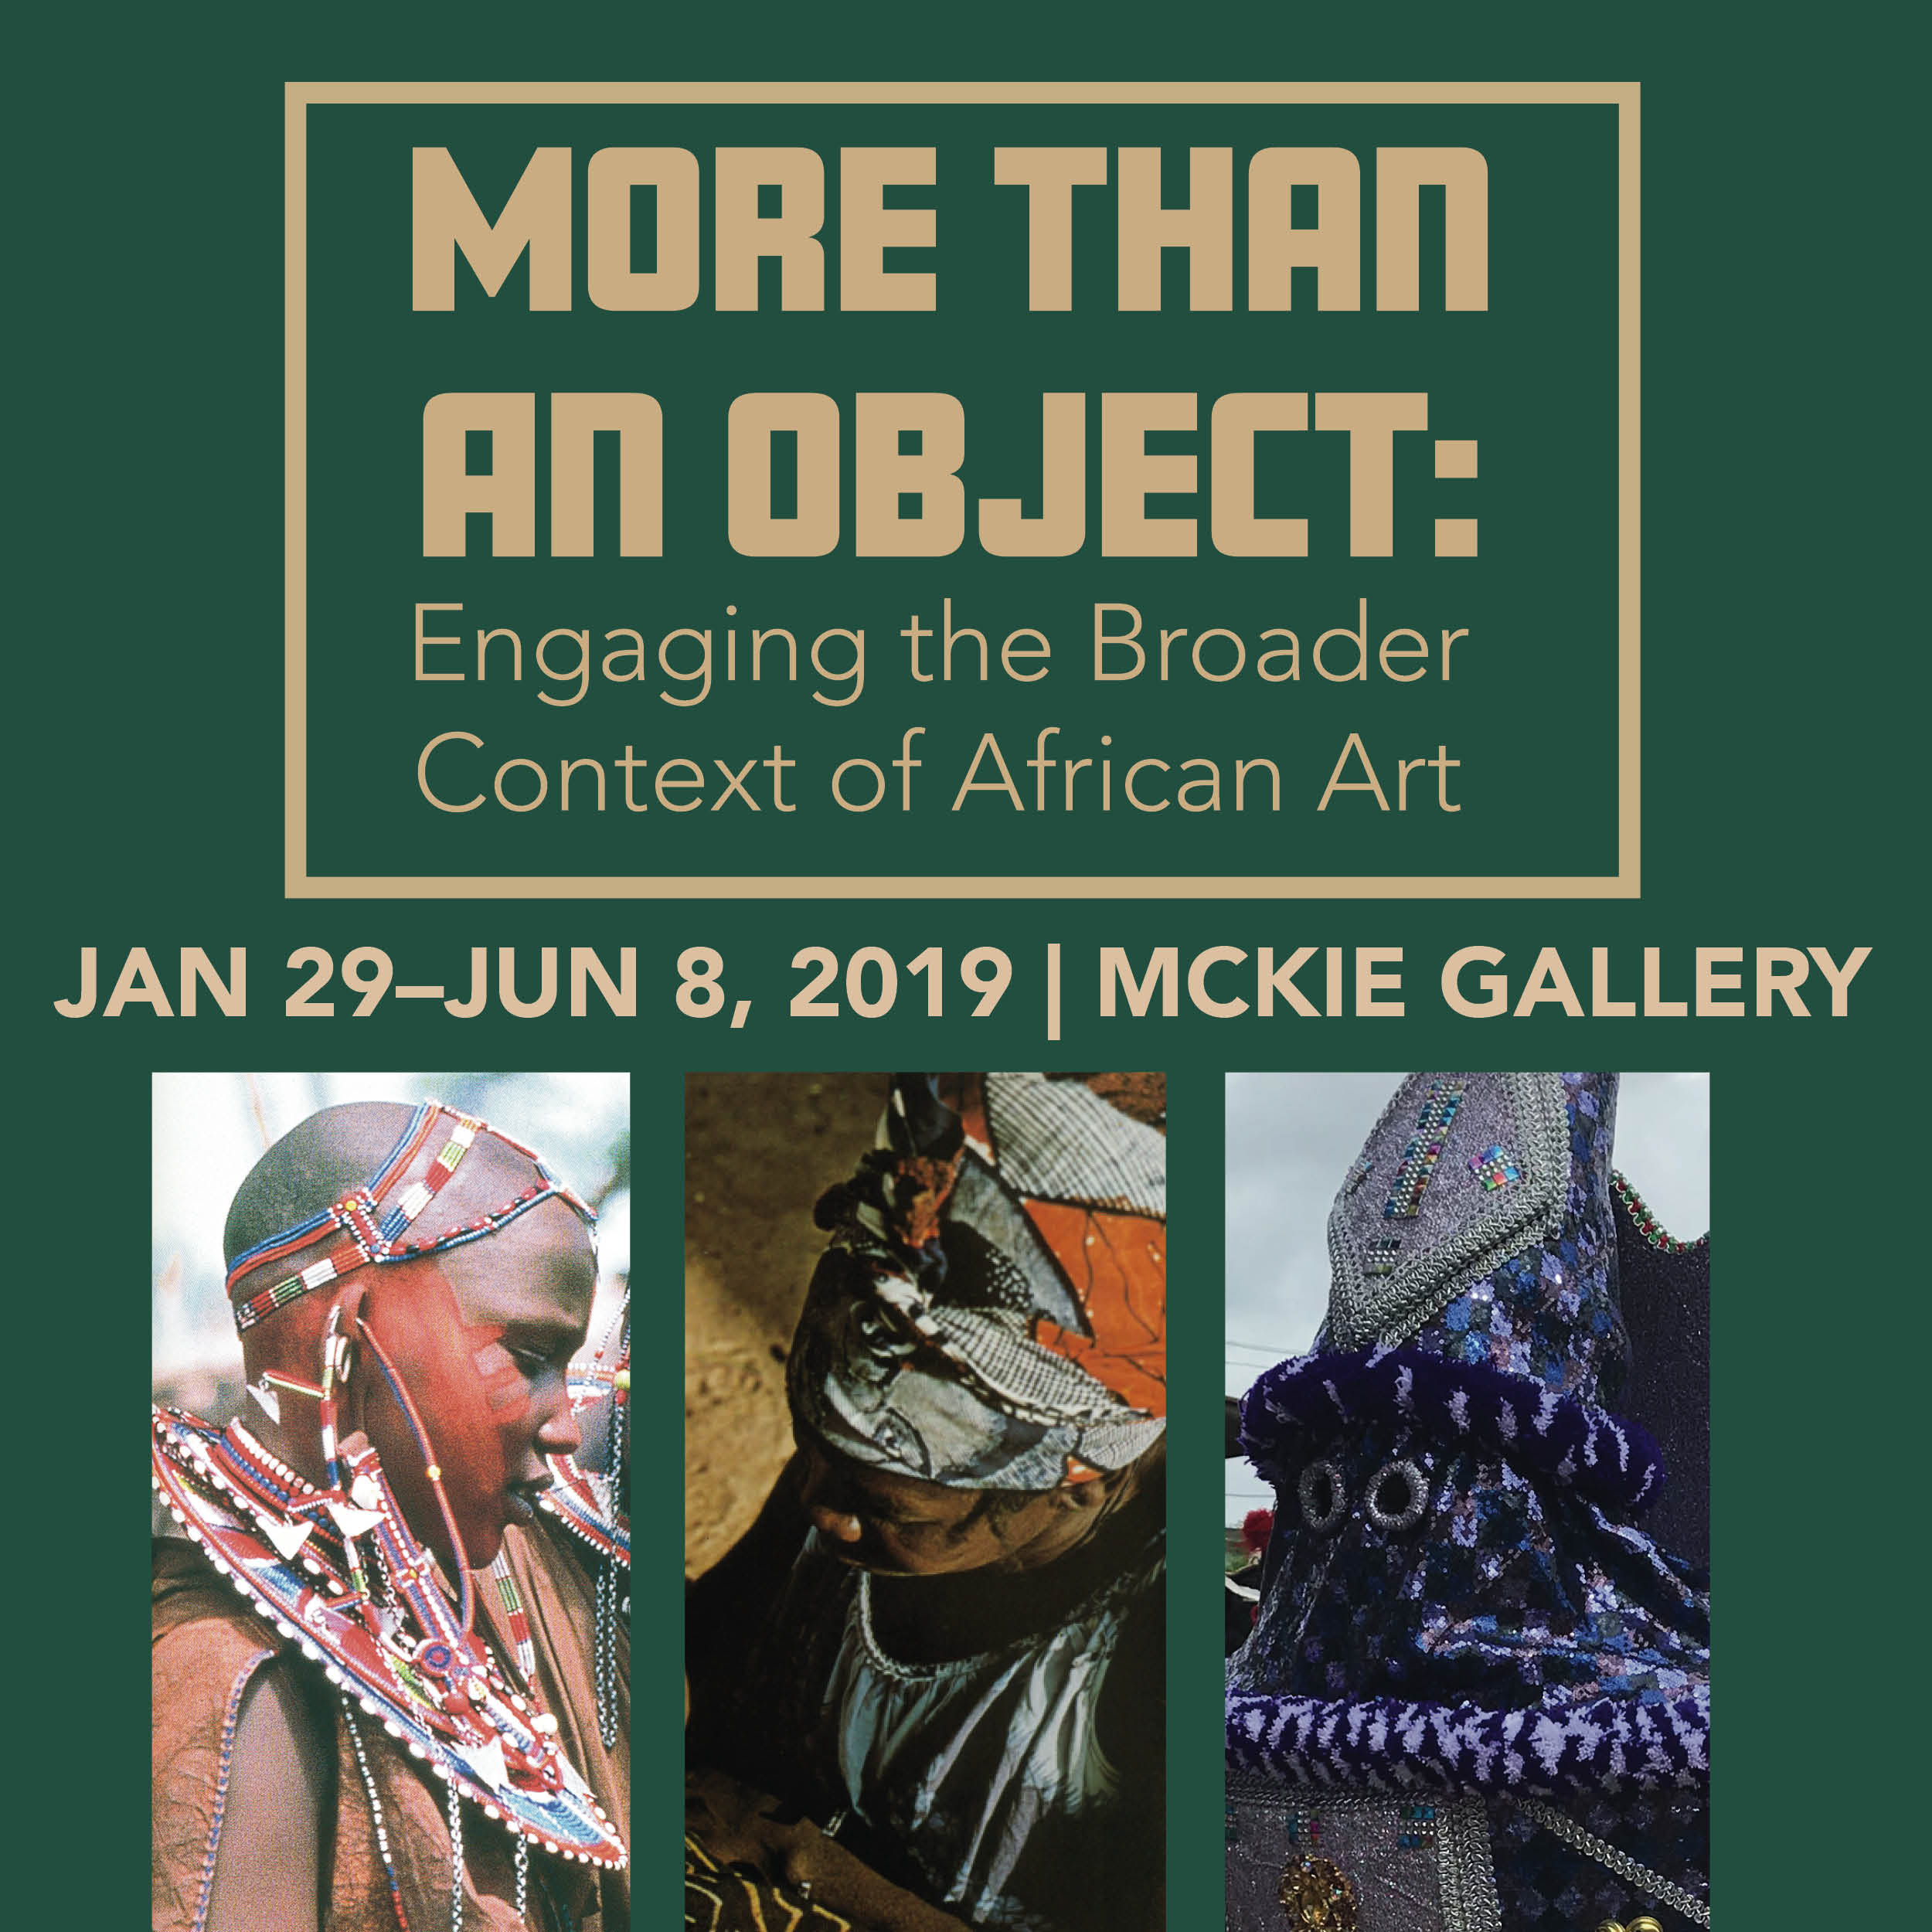 More Than an Object: Engaging the Broader Context of African Art January 29-June 8, 2019 McKie Gallery